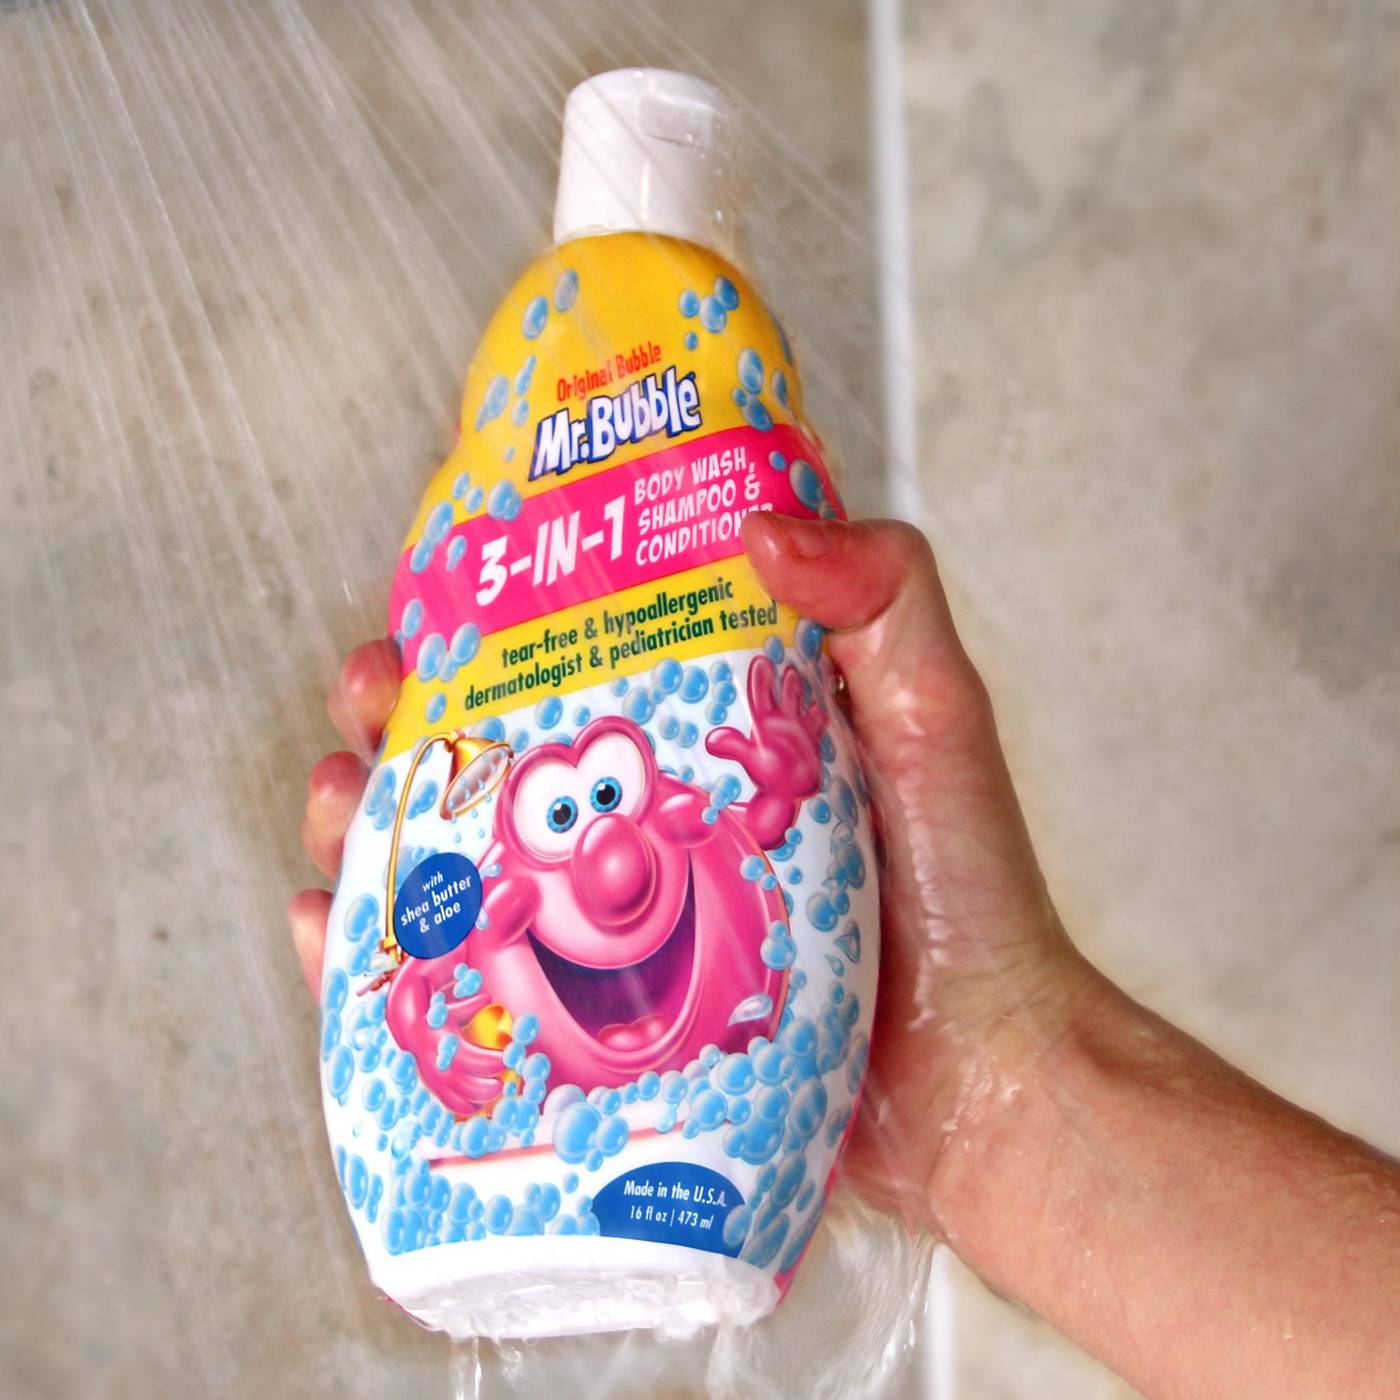 Mr. Bubble 3 In 1 Body Wash, Shampoo and Conditioner; image 2 of 3